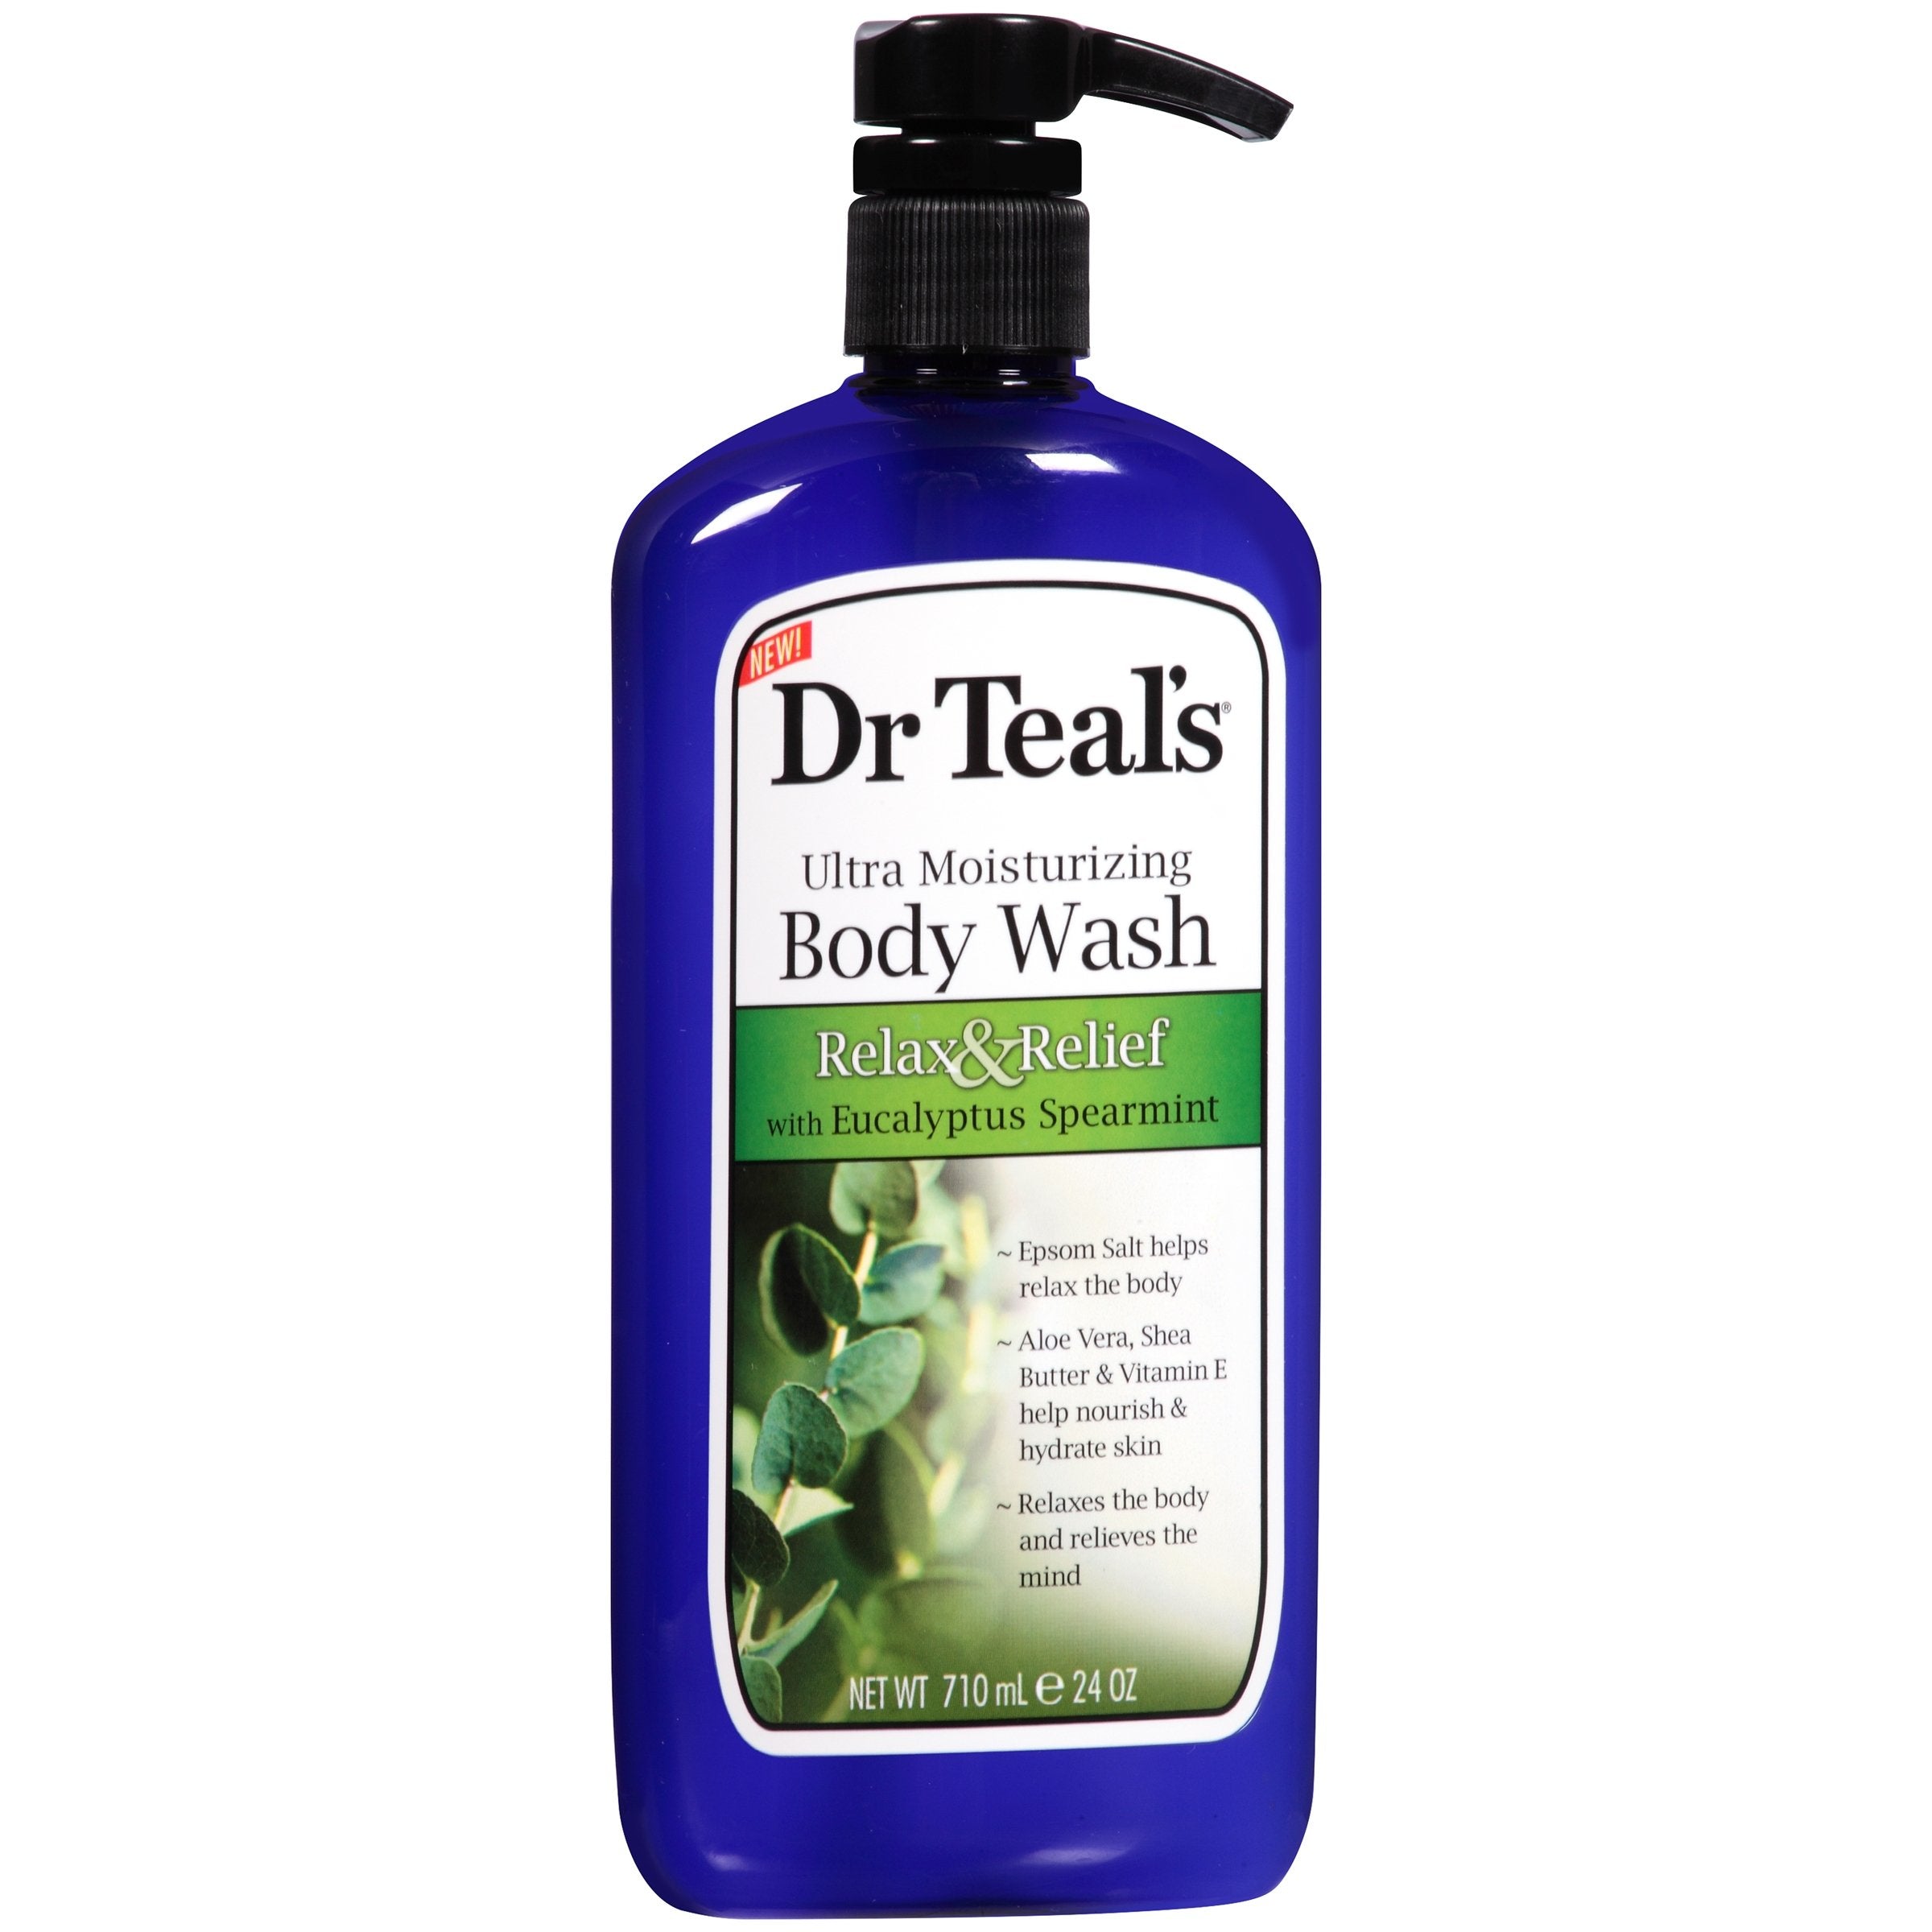 4th Ave Market: Dr Teal's Ultra Moisturizing Body Wash Relax and Relief with Eucalyptus Spearmint